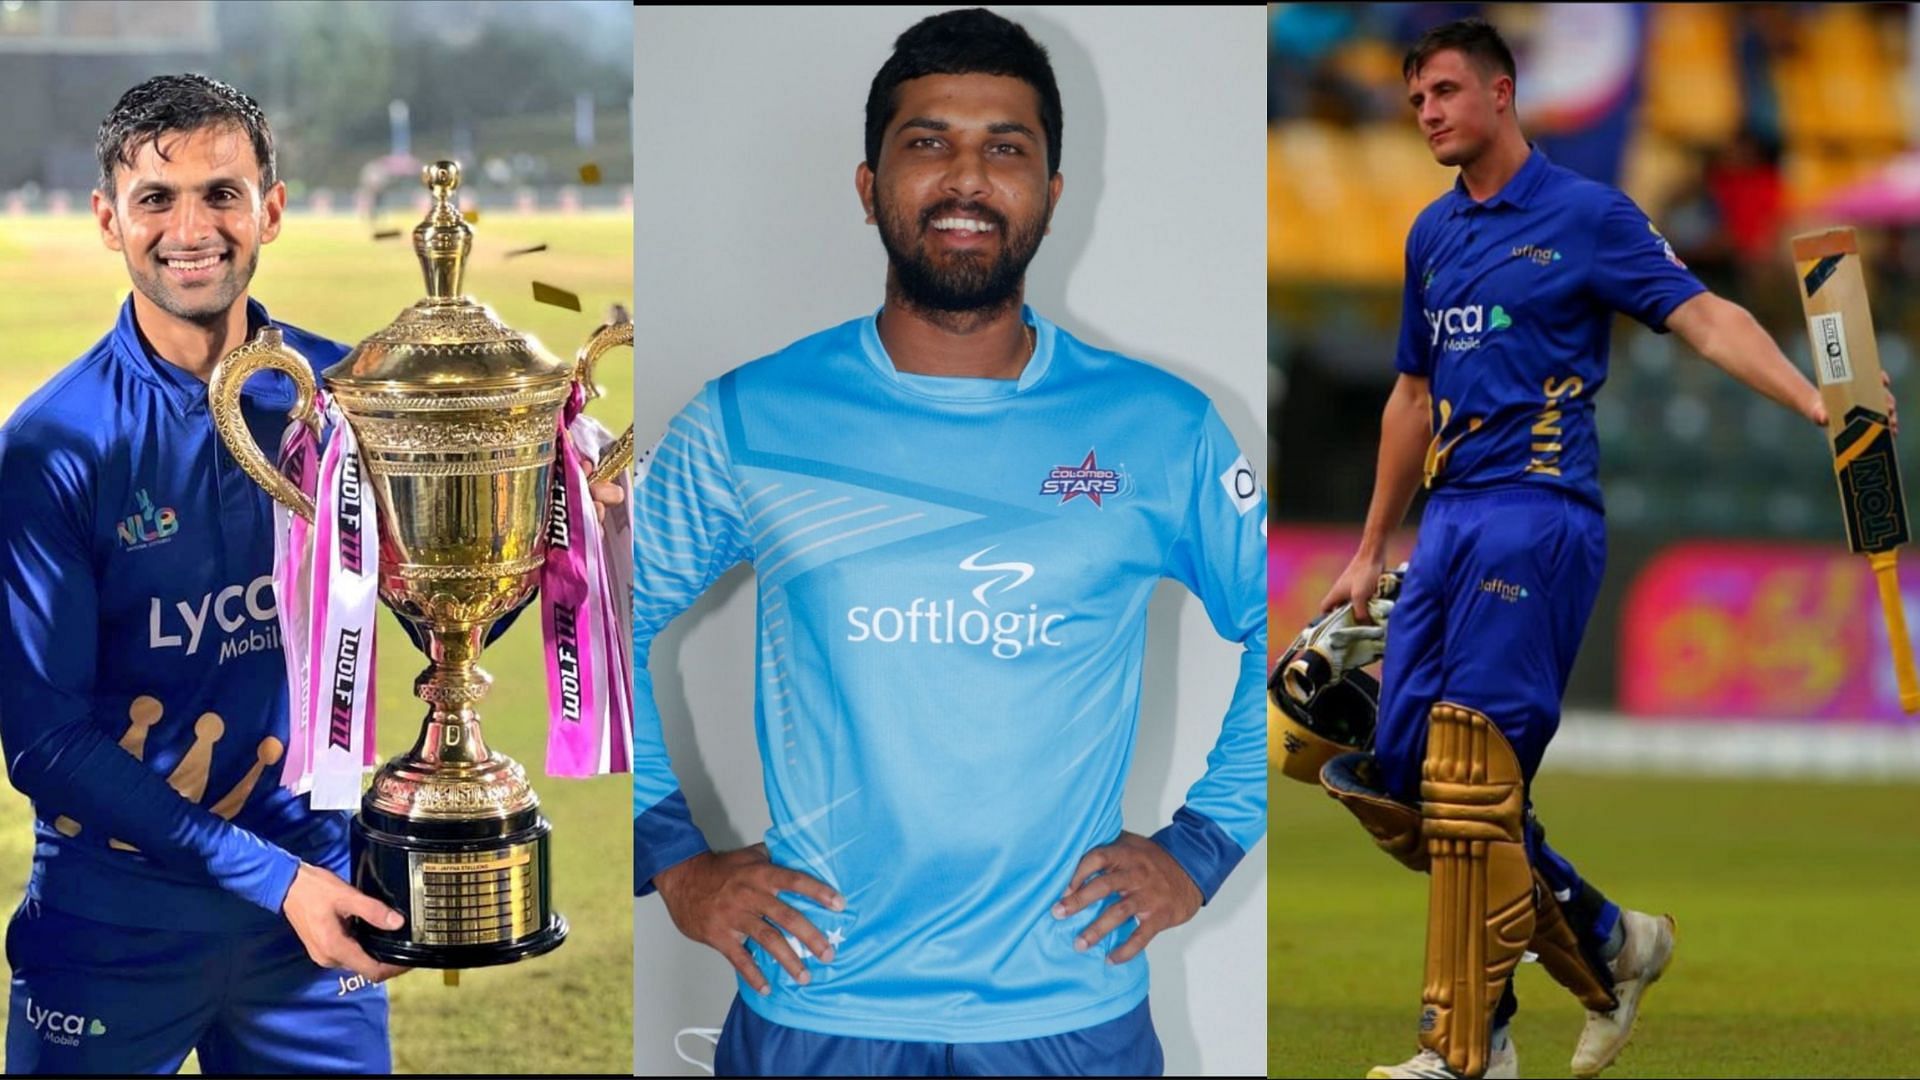 The likes of Shoaib Malik, Dinesh Chandimal and Tom Kohler-Cadmore feature in the best playing XI from Lanka Premier League